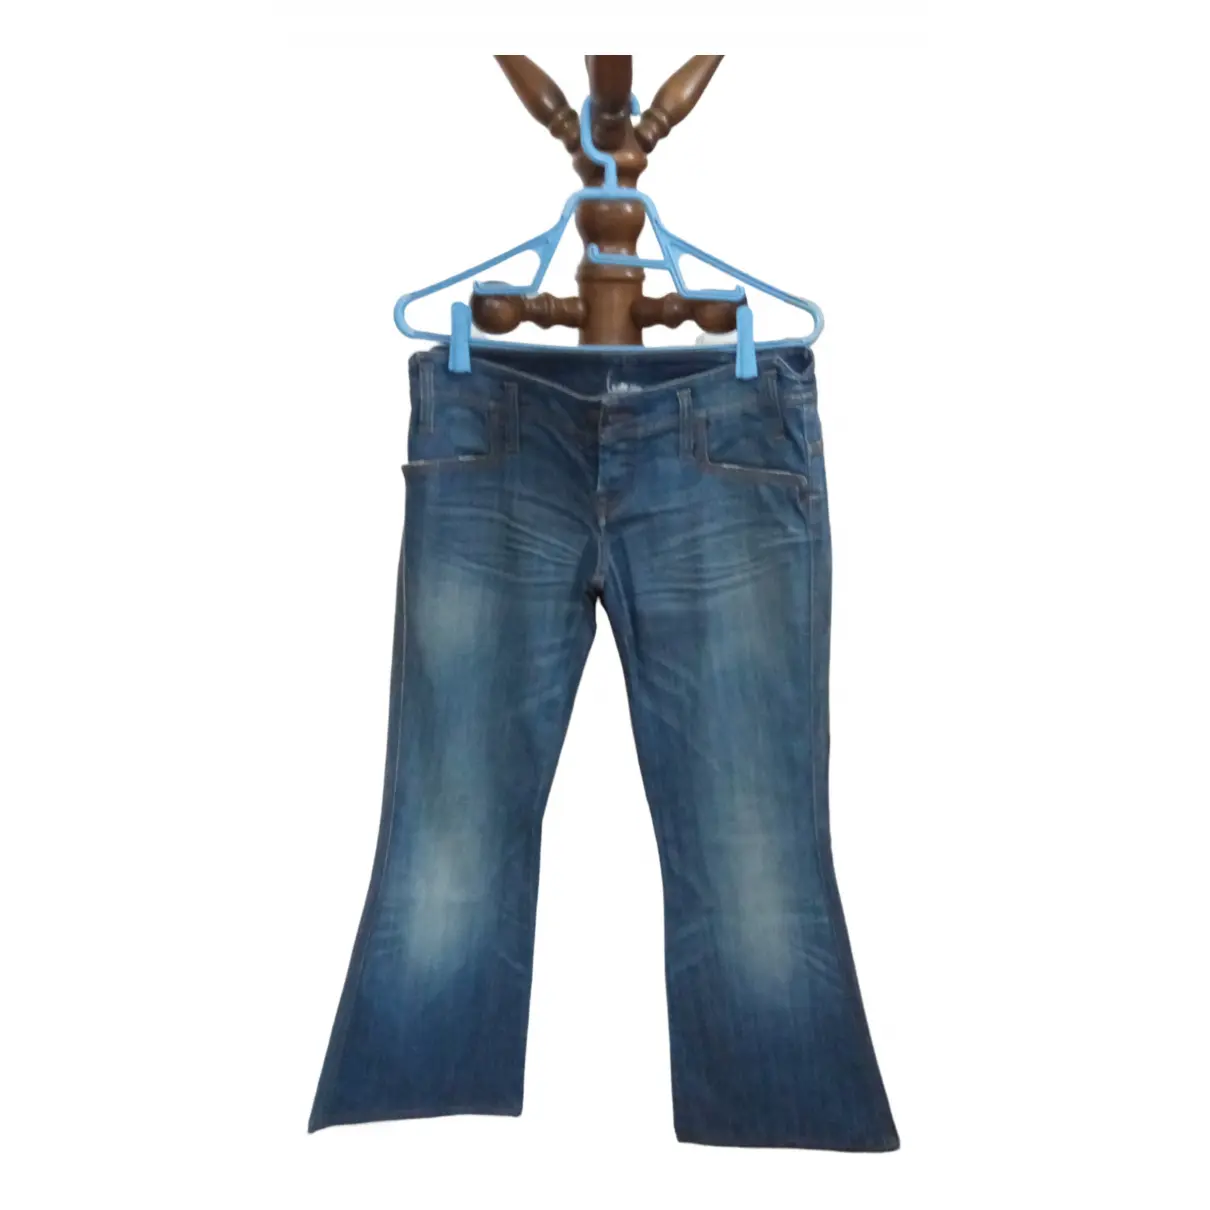 Straight jeans Cycle